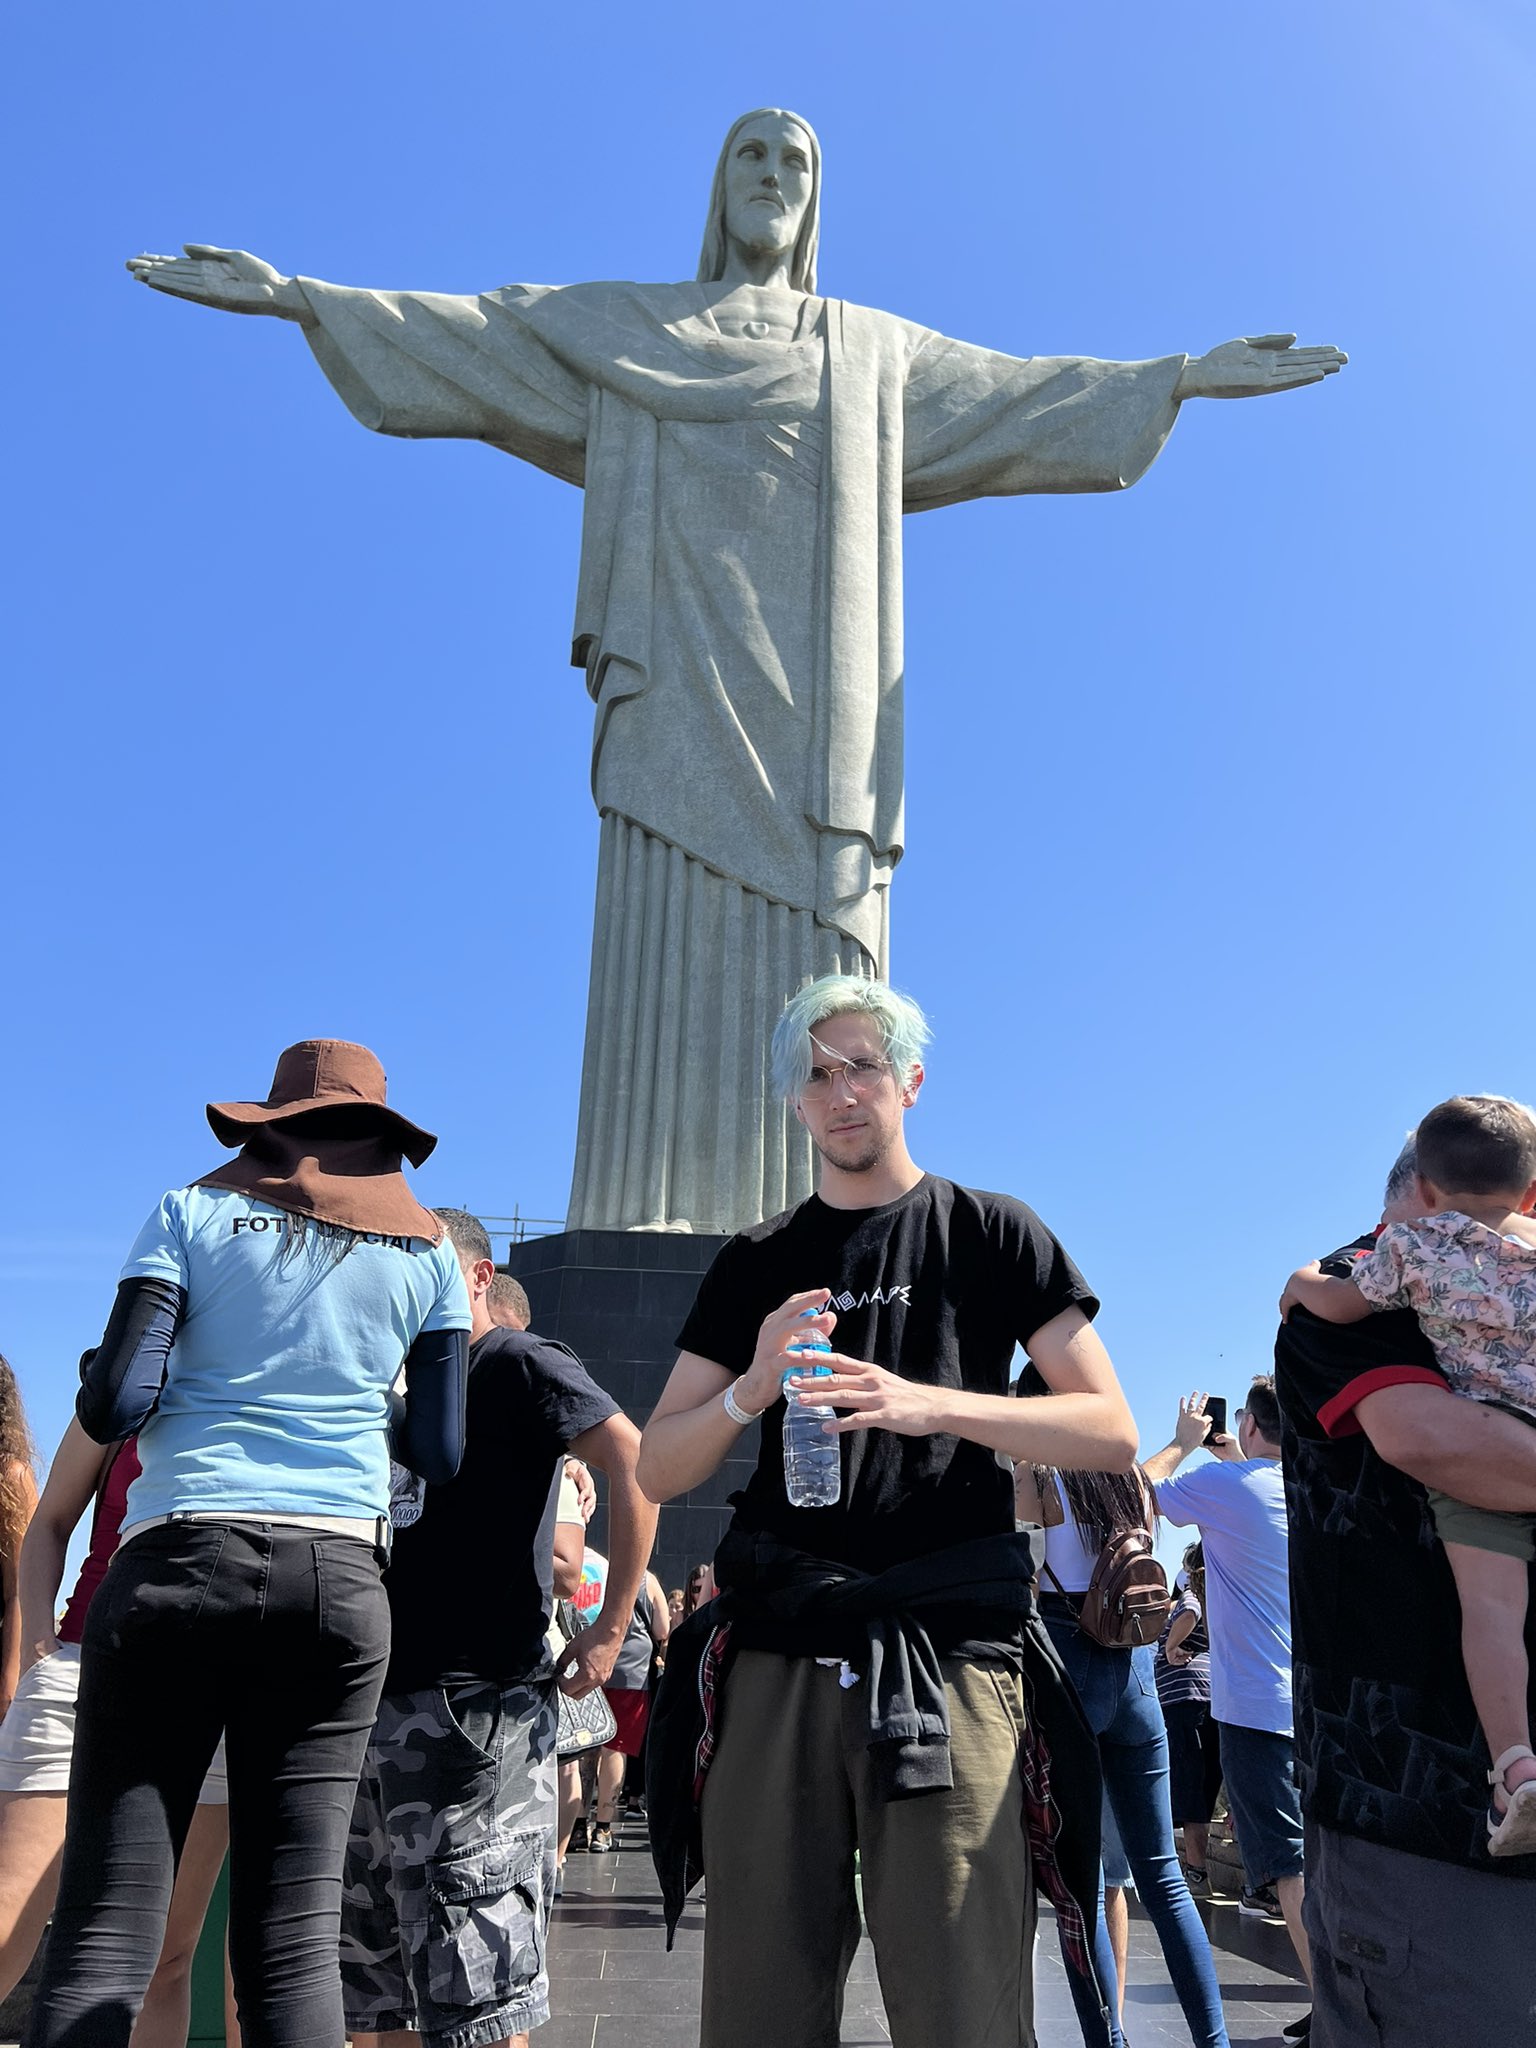 ricky montgomery on X: some pics of the T pose Jesus statue in brazil   / X